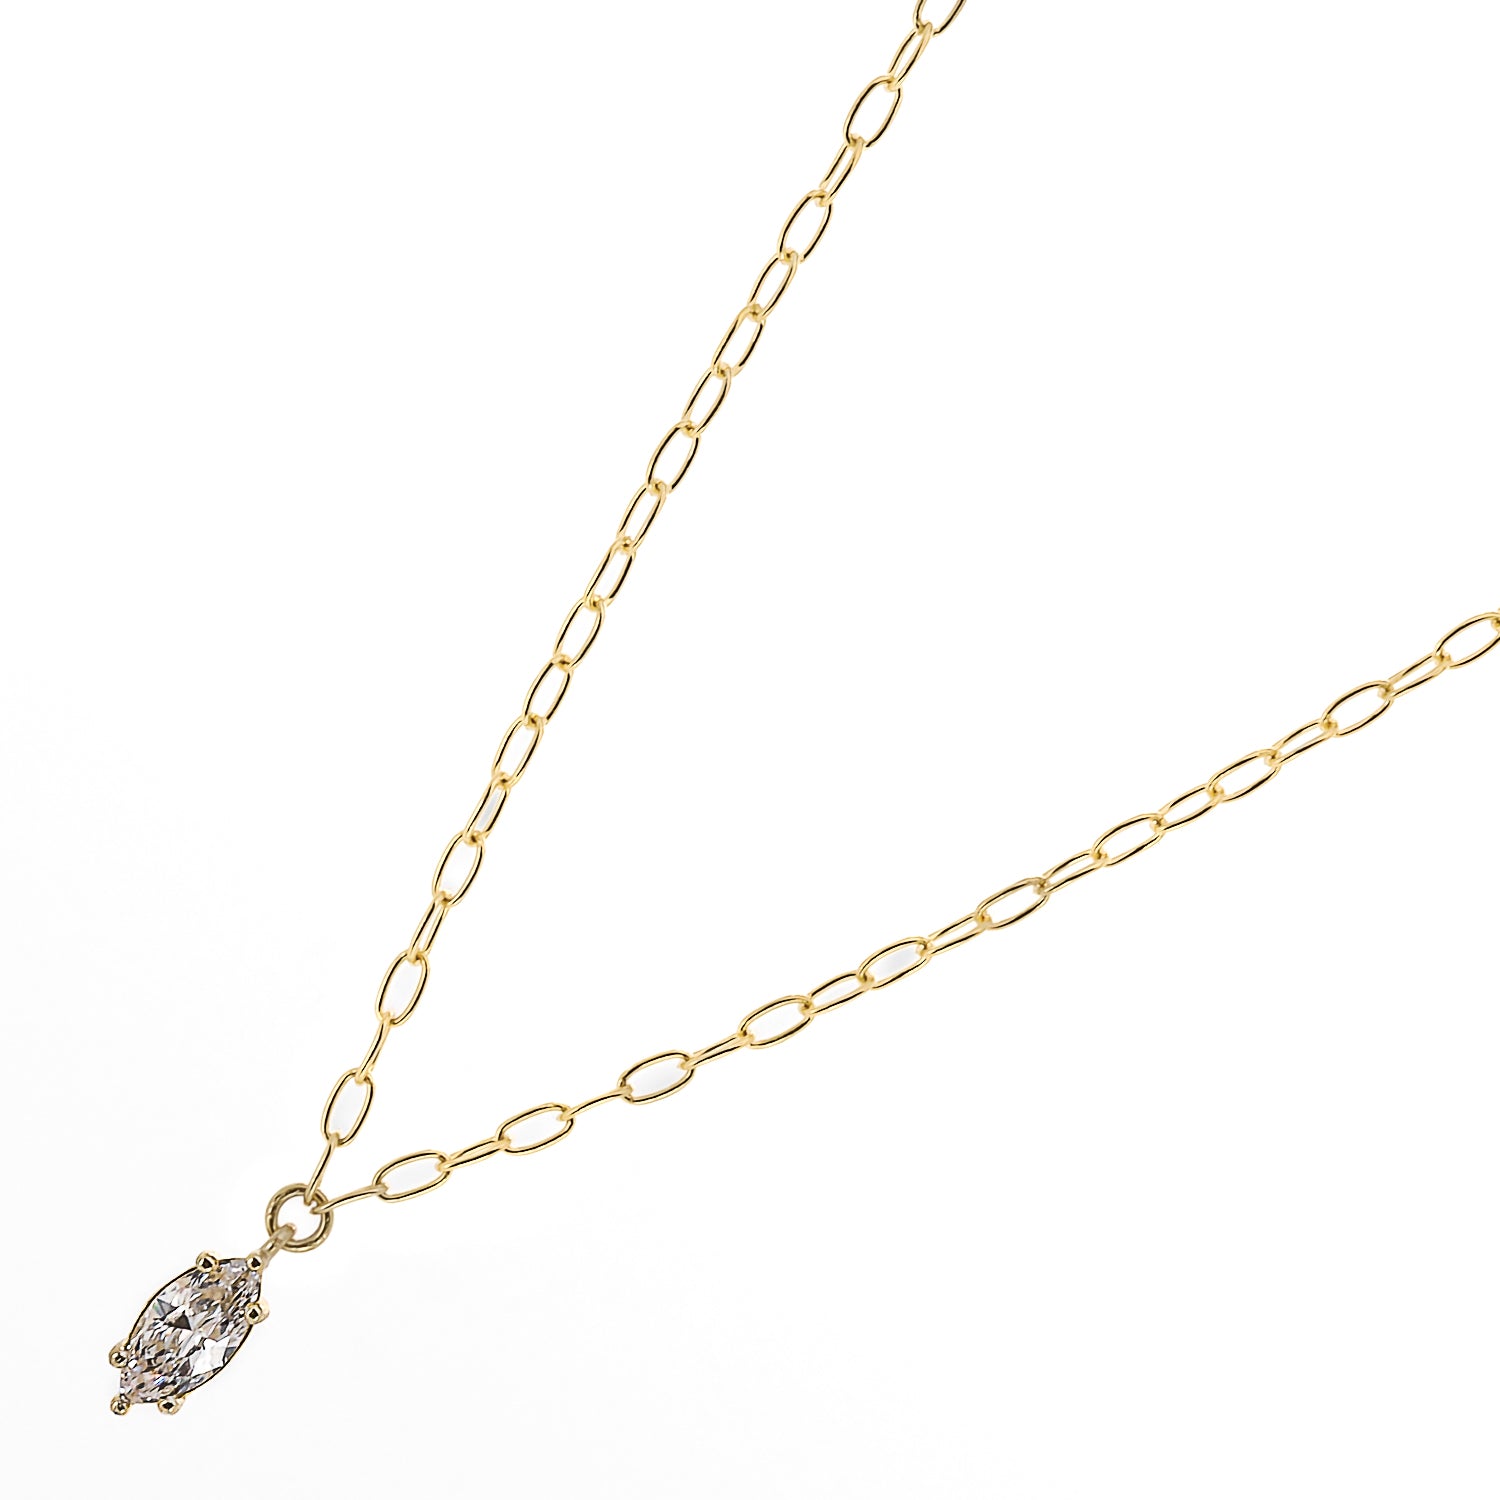 A close-up of the Gold and Diamond Chain Necklace, showcasing the brilliance and clarity of the meticulously cut CZ Diamond stone.